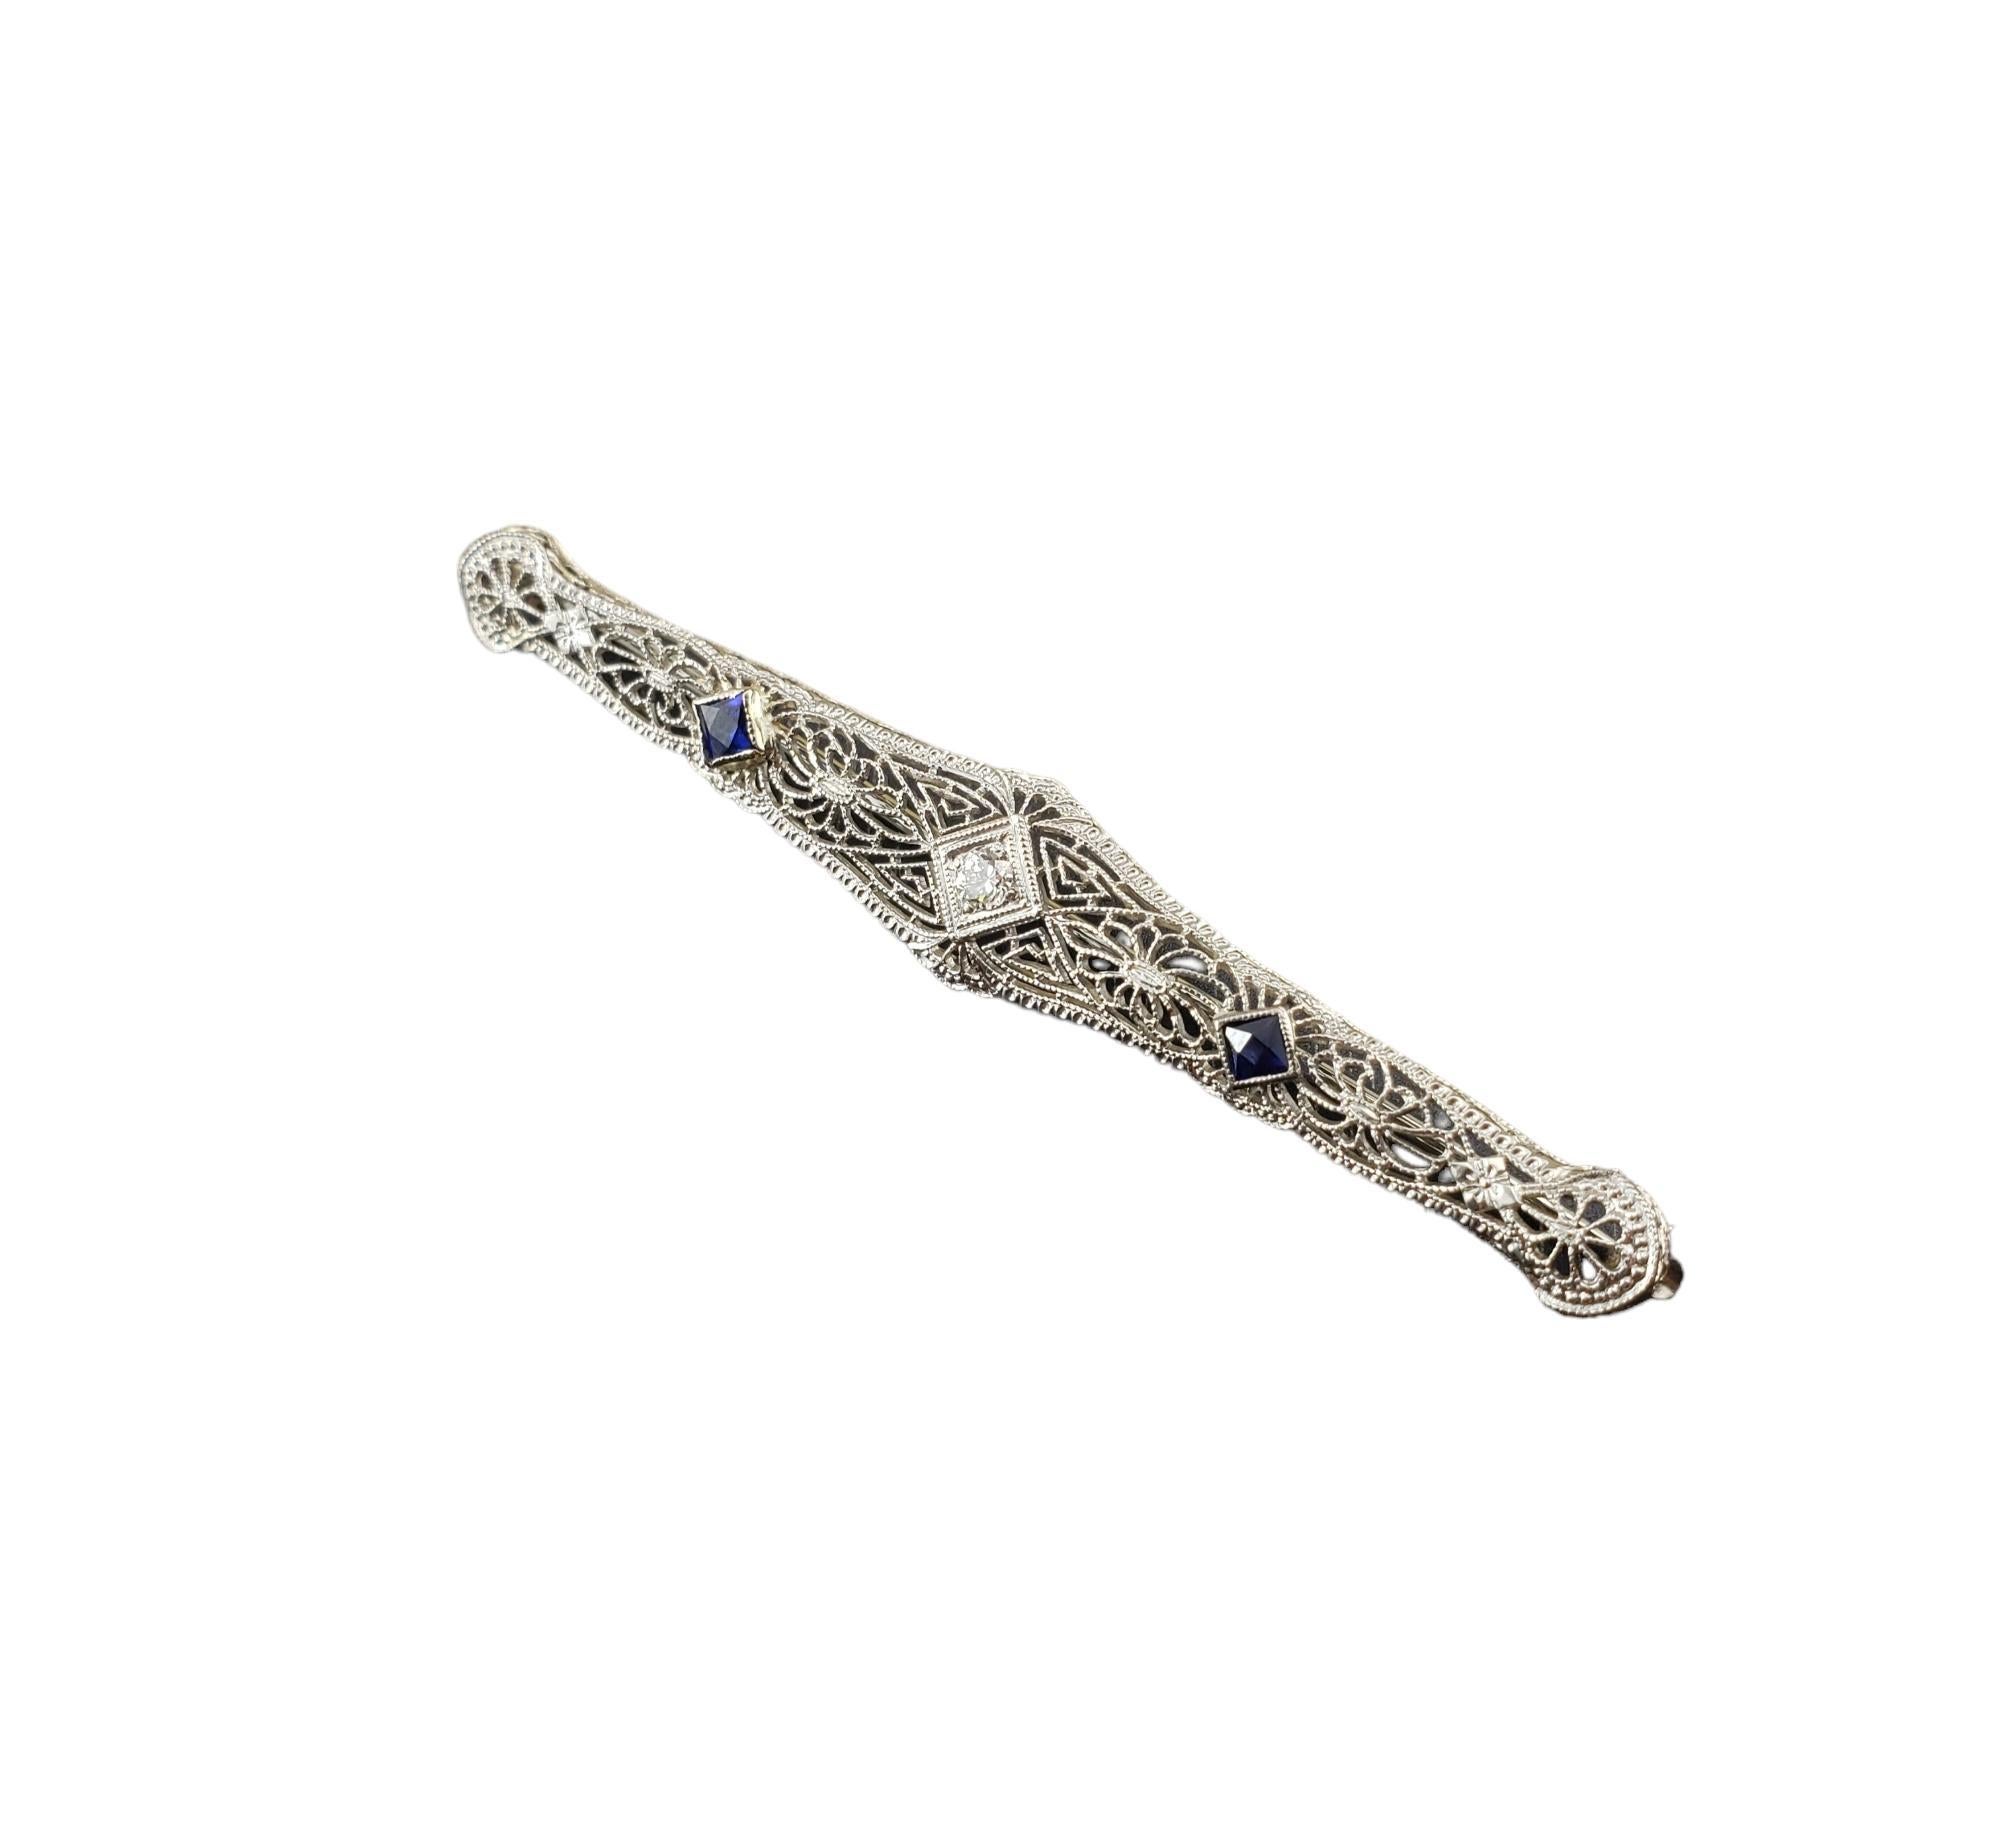 14K White Gold Filigree Simulated Sapphire and Diamond Brooch/Pin

This stunning brooch features two simulated sapphires and one round brilliant cut diamond set in beautifully detailed 14K white gold filigree.

Approximate diamond weight: .08